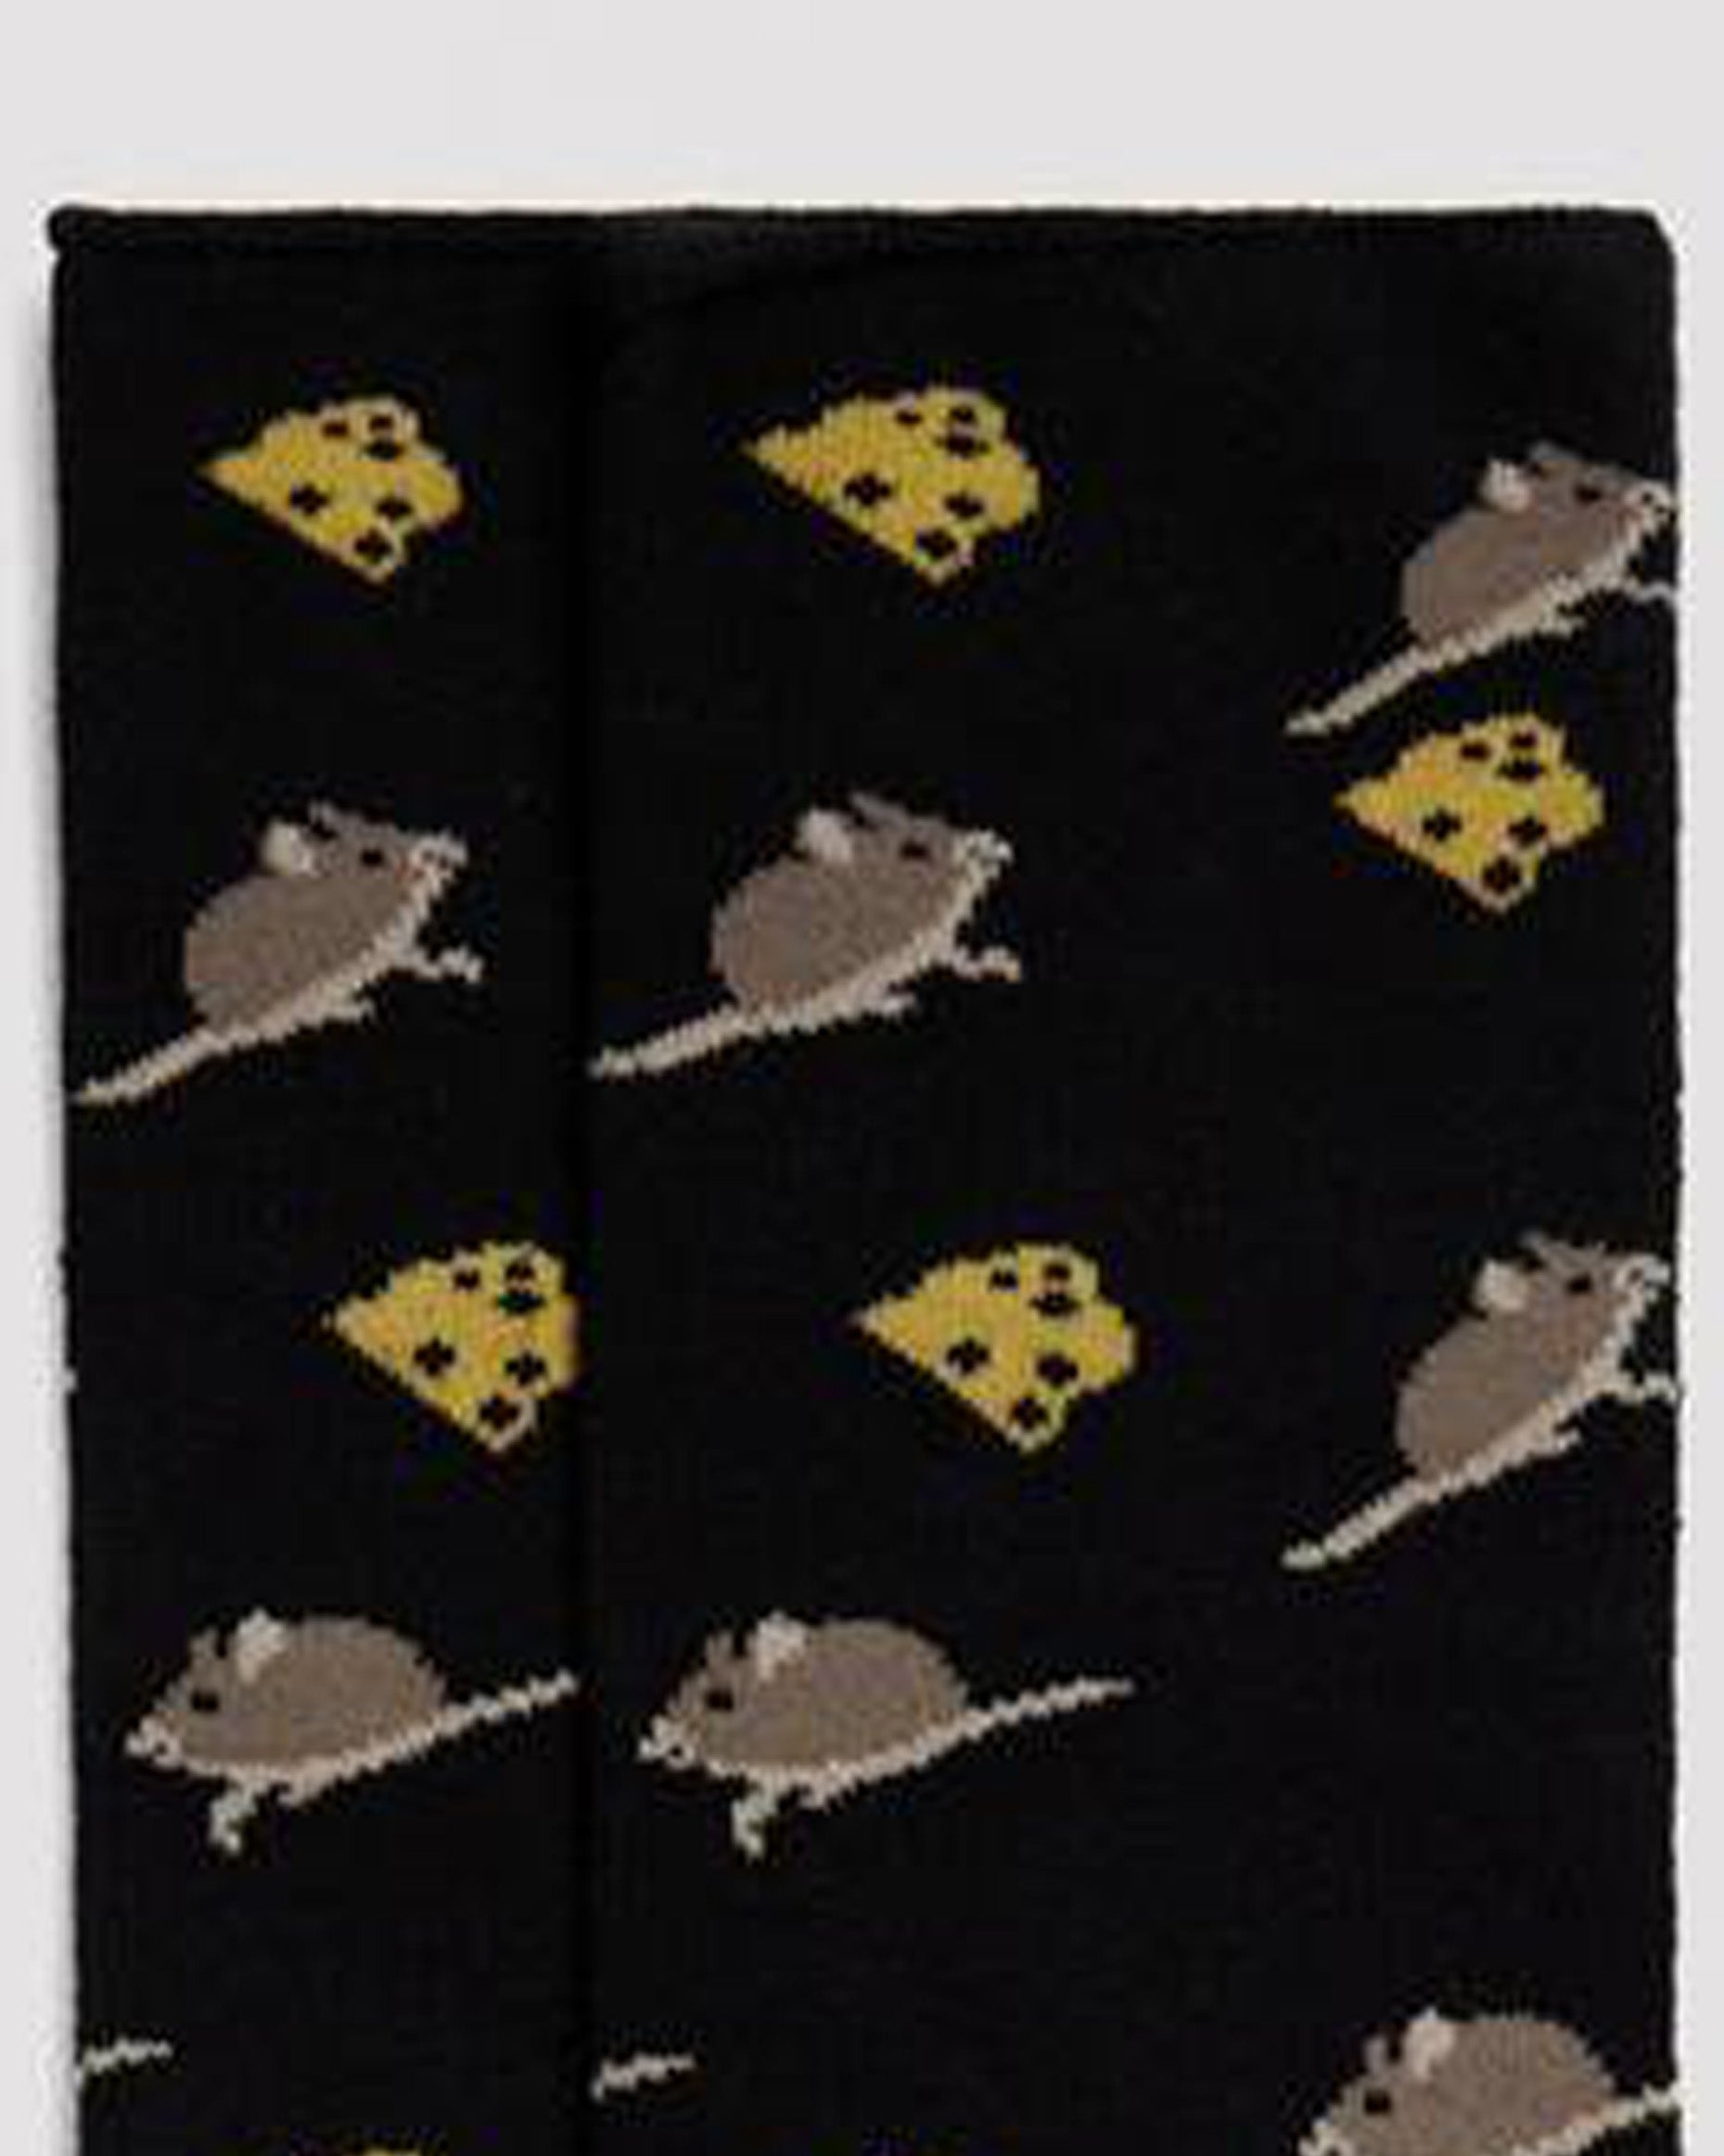 Ysabel Mora 22882 Mouse Sock - YM-22882-mouse-cheese-socksYsabel Mora 22882 Mouse Sock - Black cotton mix crew length ankle socks with a mouse and cheese pattern in shades of brown and yellow.